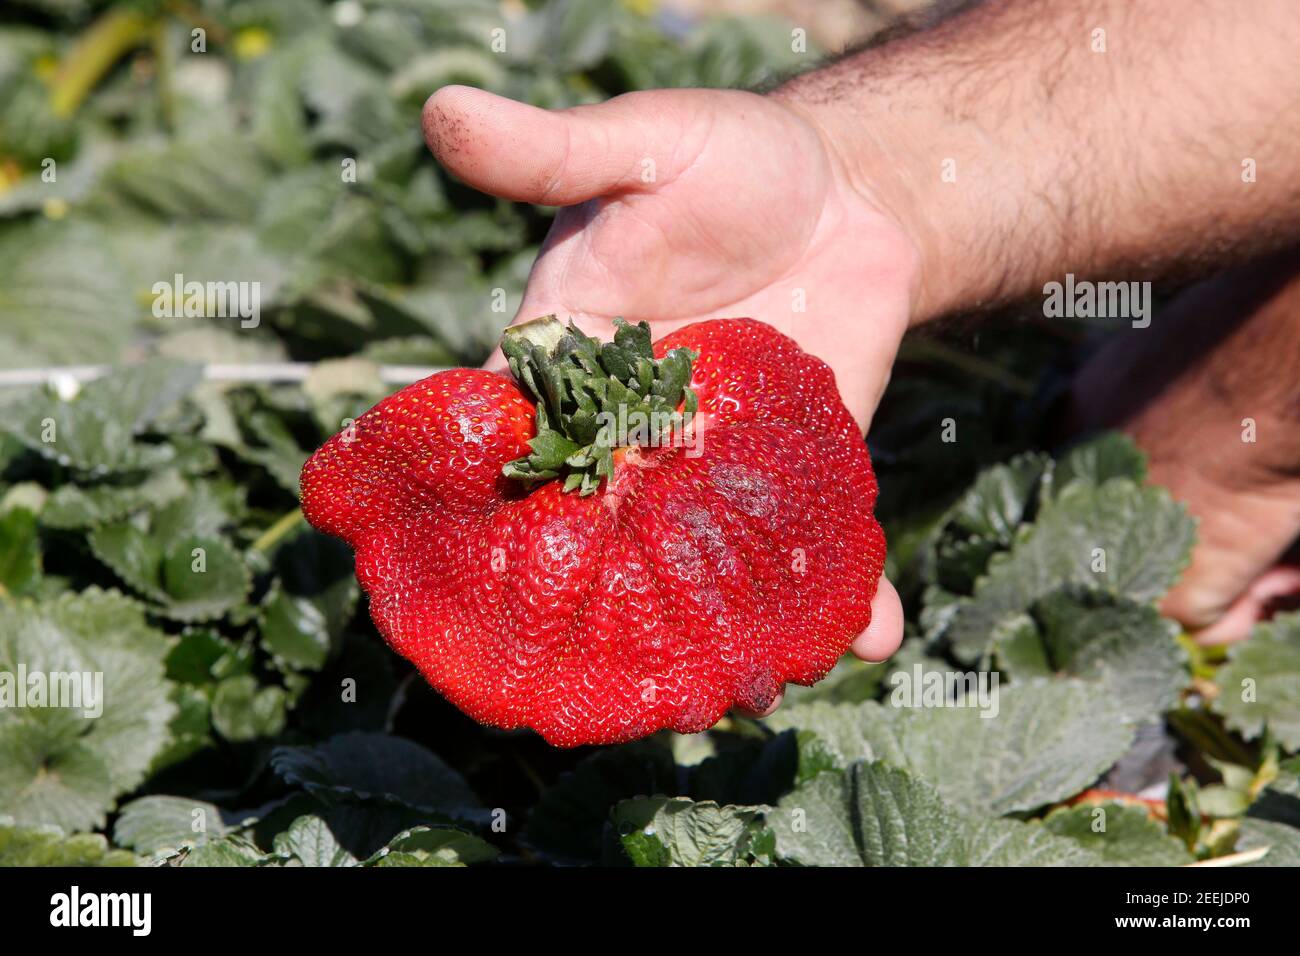 Netanya 15th Feb 21 Israeli Agriculturist Tzachi Ariel Shows A Strawberry Which Weighs 290 Grams And Has Been Nominated For Guinness World Records In The Kadima Village Near Central Israeli City Of